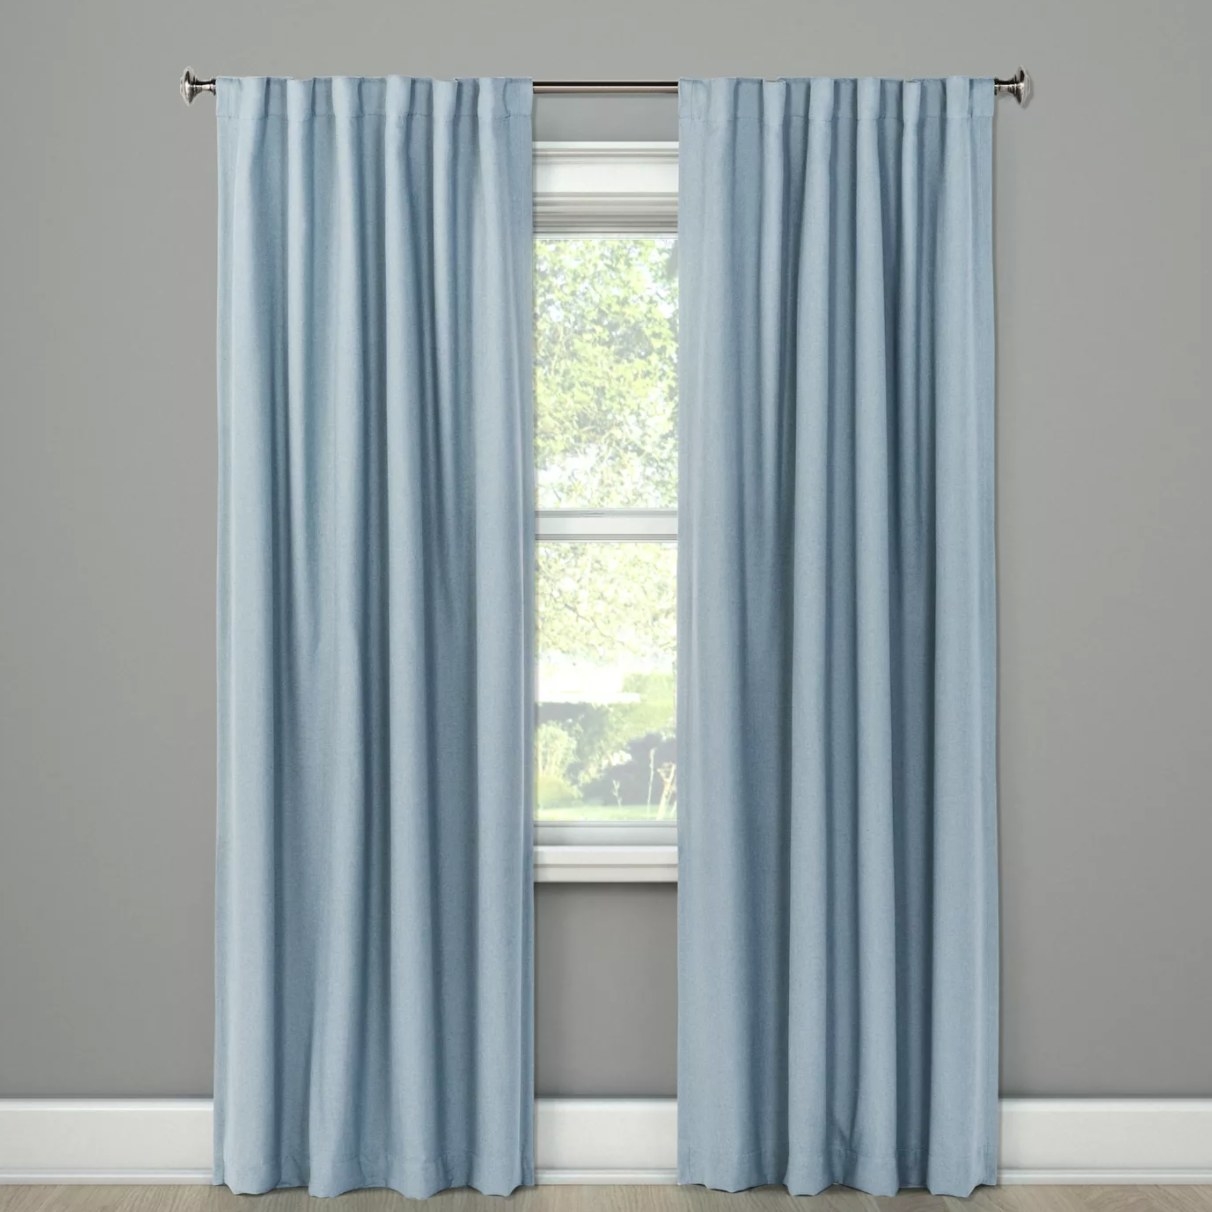 The blue curtains on a window 